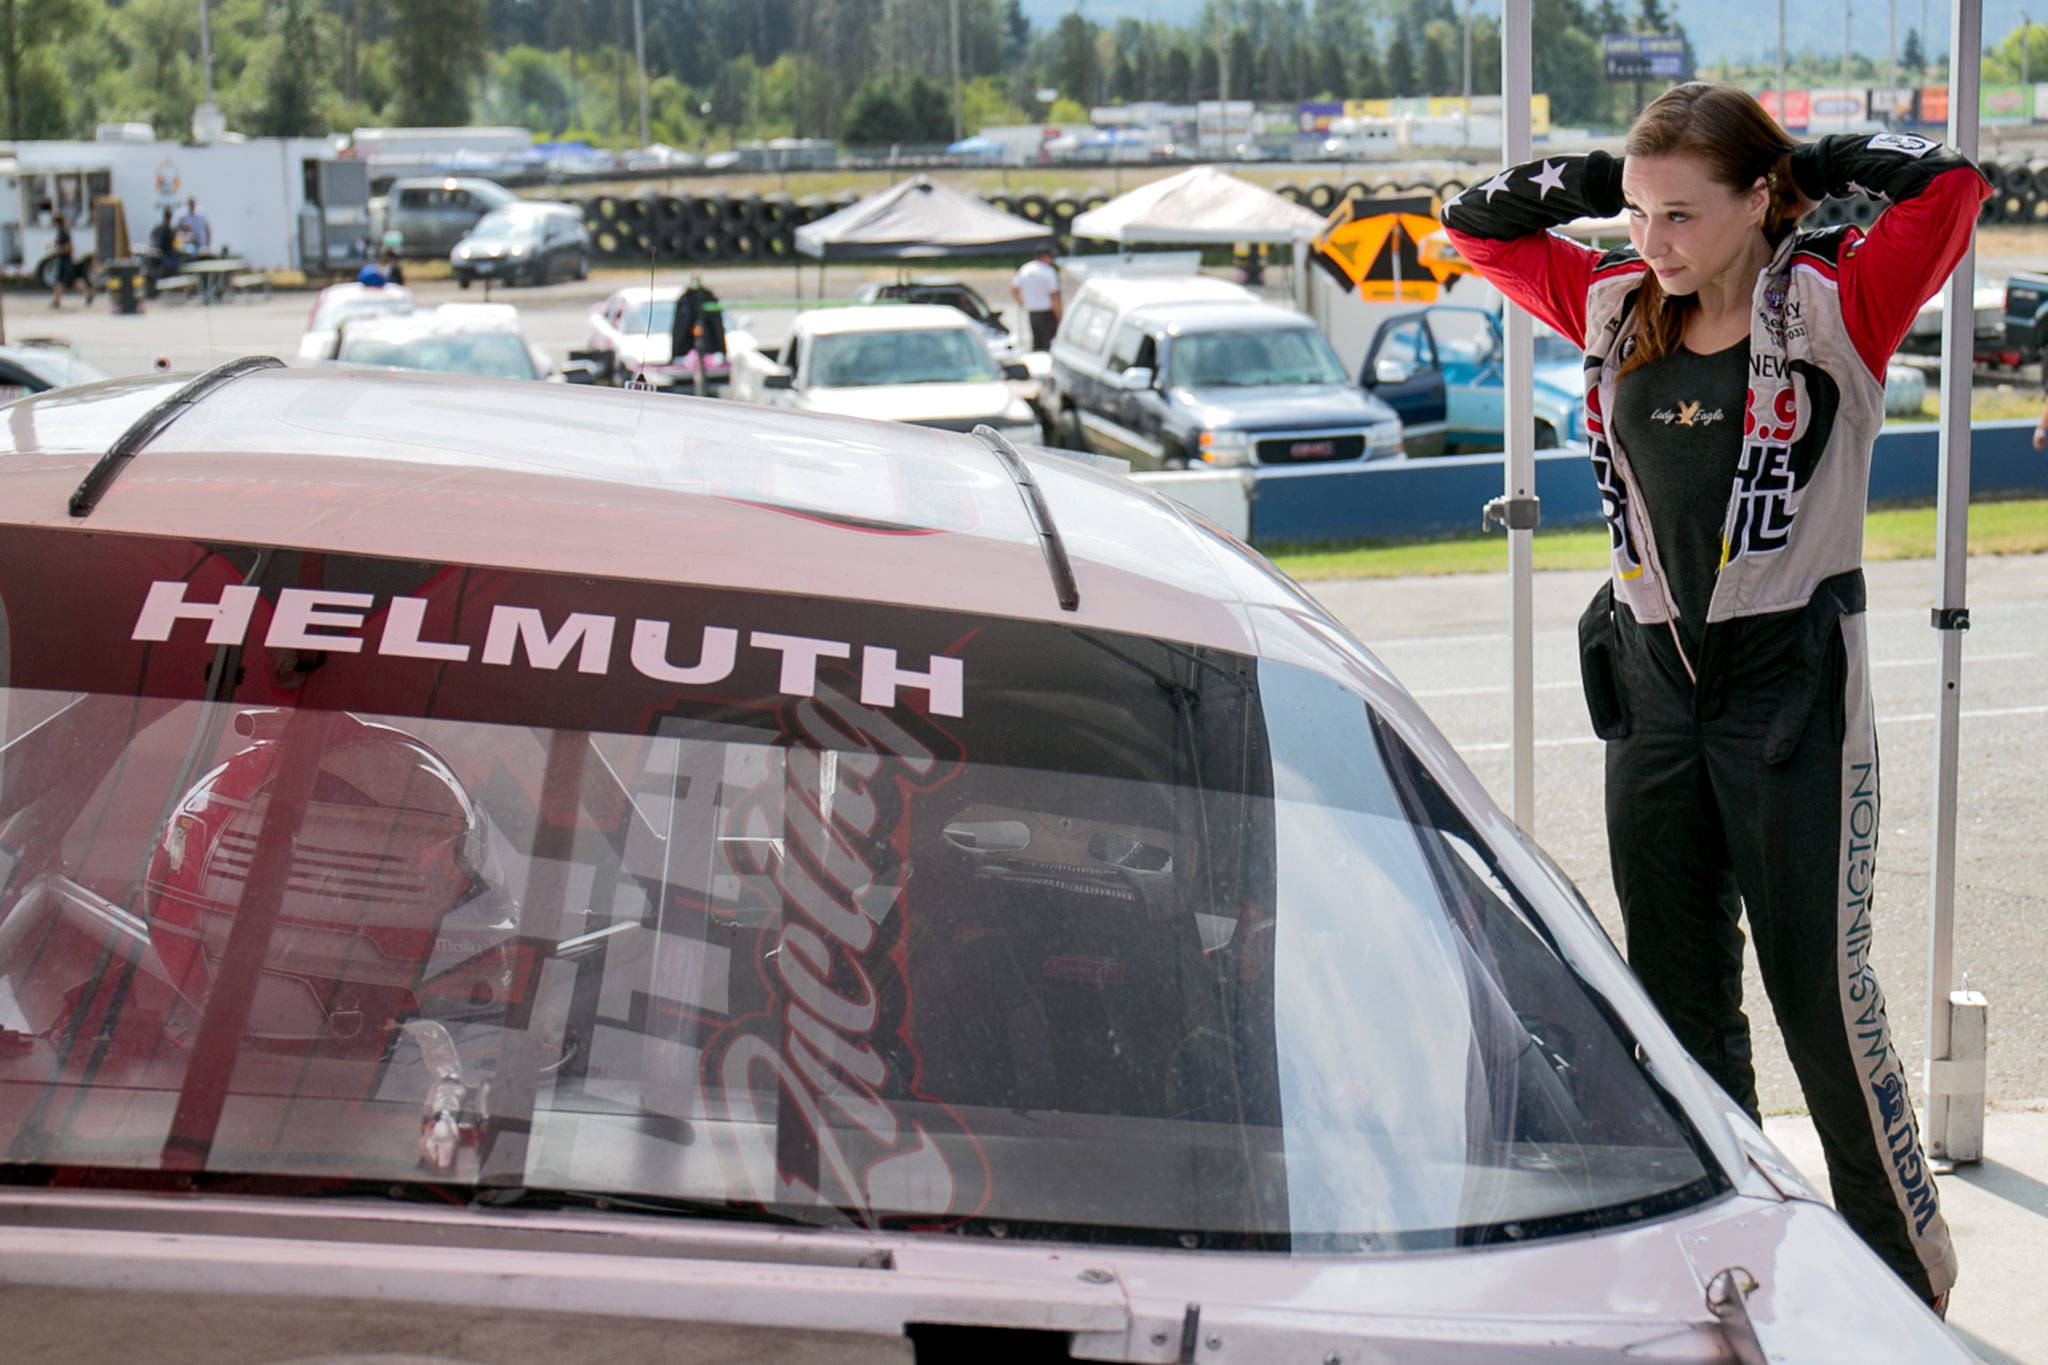 Molly Helmuth prepares for time trials on July 28 at Evergreen Speedway in Monroe. Helmuth has a busy racing schedule this summer, competing regularly at Evergreen and on the CARS Racing Tour, based on the East Coast. (Kevin Clark / The Herald)